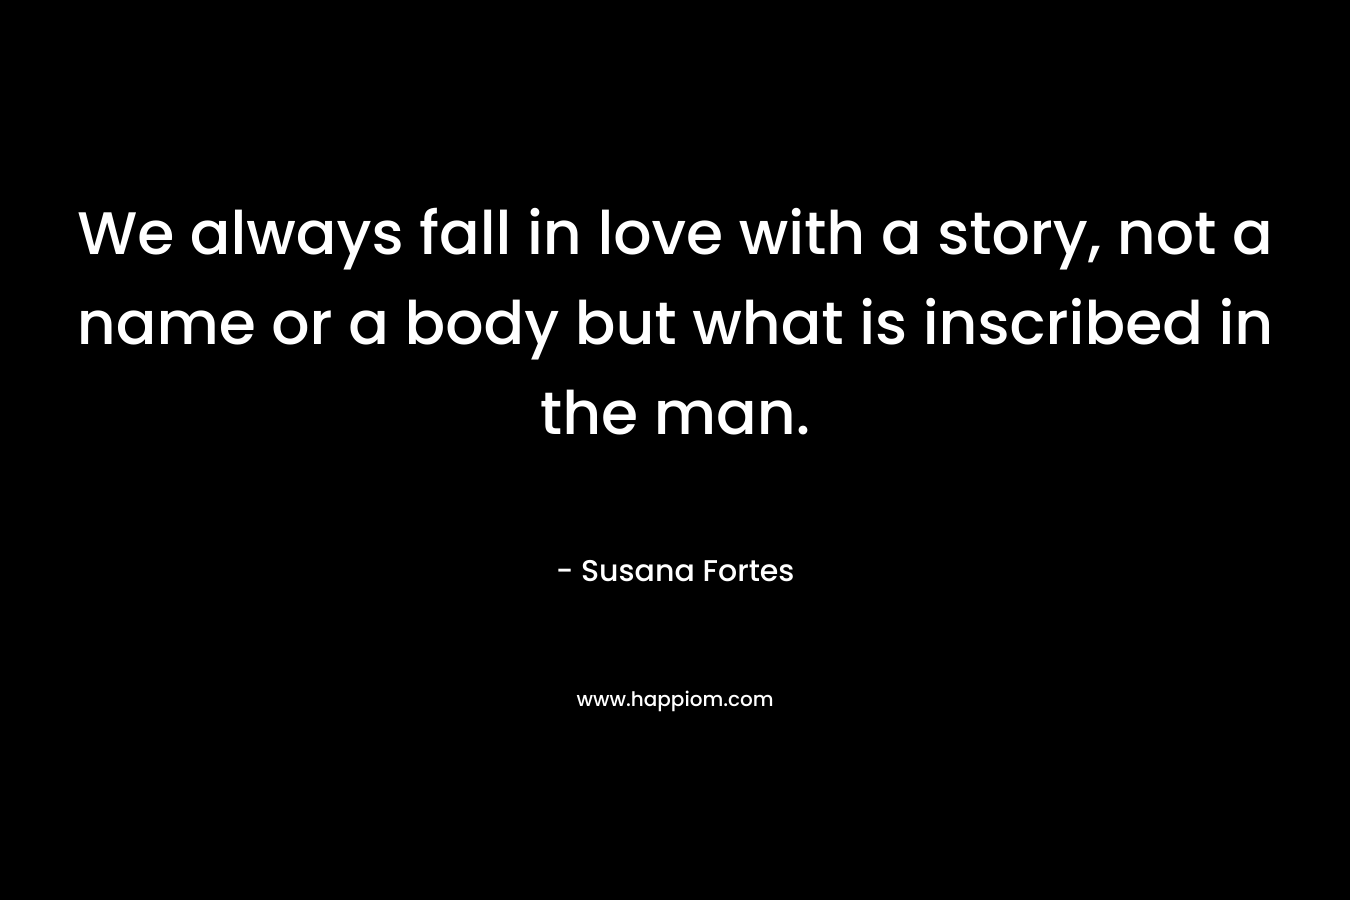 We always fall in love with a story, not a name or a body but what is inscribed in the man. – Susana Fortes